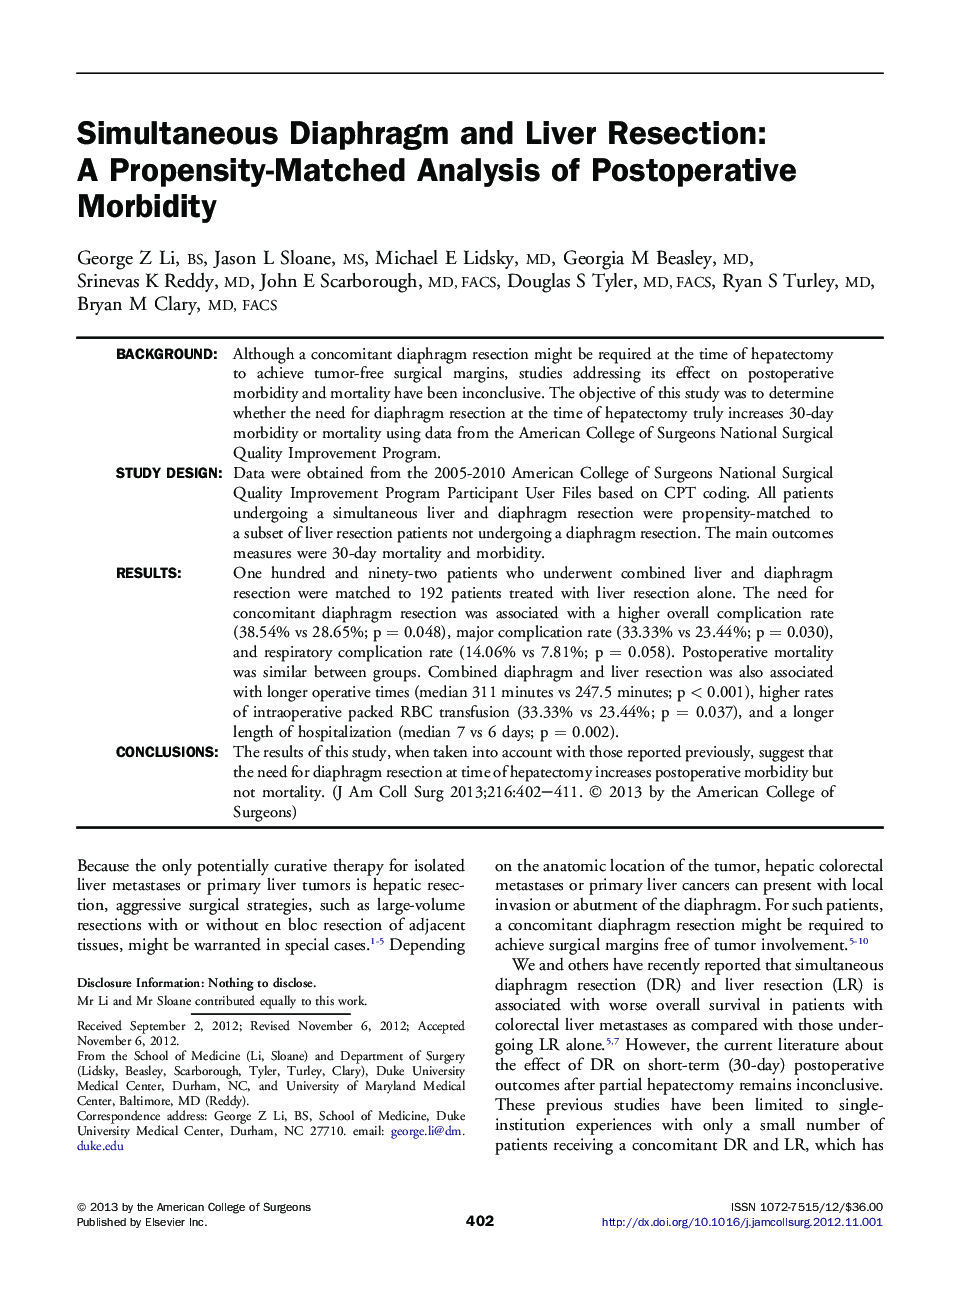 Simultaneous Diaphragm and Liver Resection: A Propensity-Matched Analysis of Postoperative Morbidity 